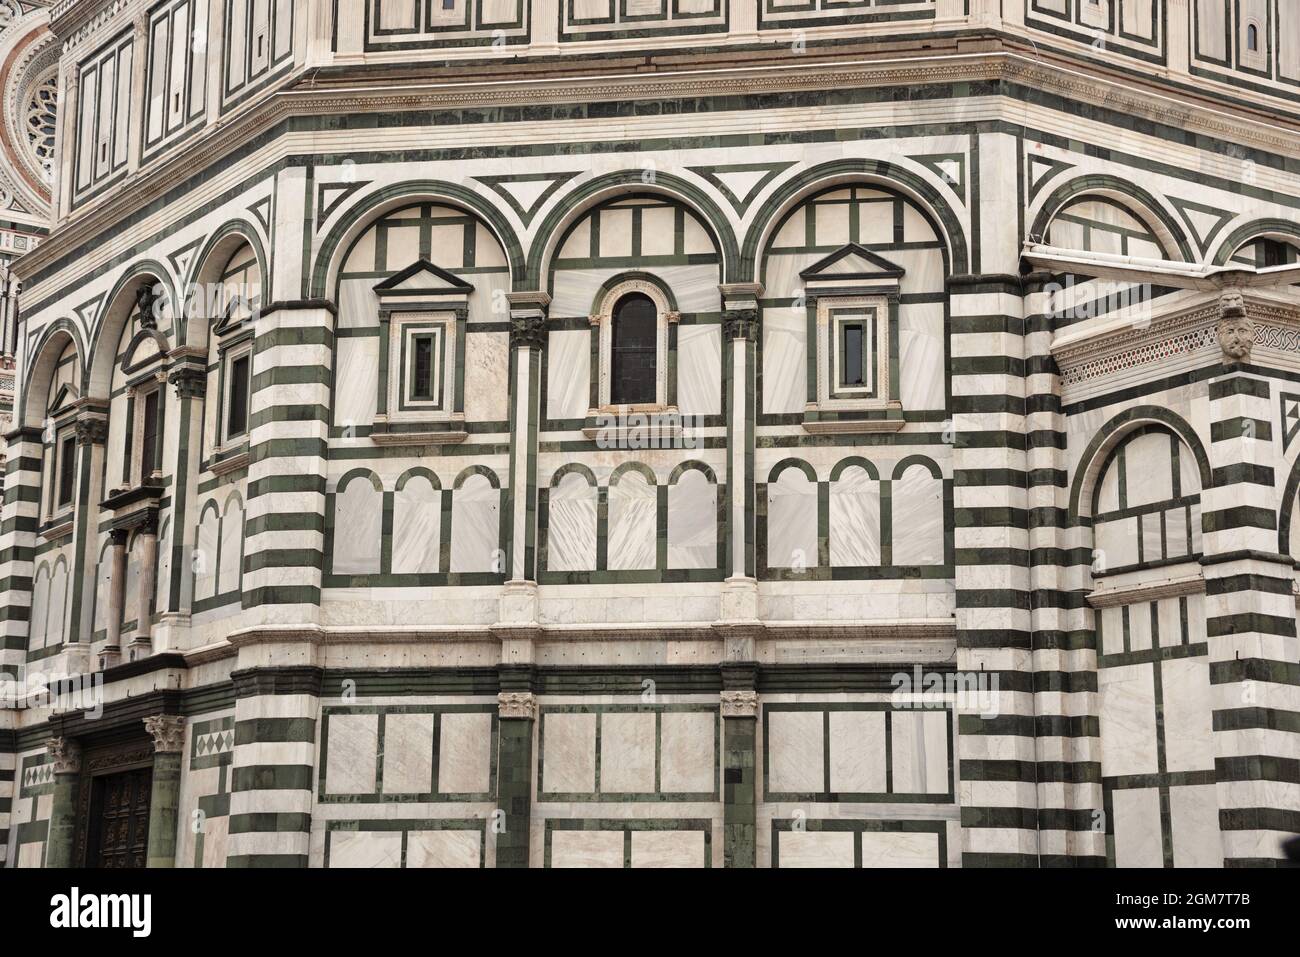 Closeup shot of the Santa Maria del Fiore Cathedral detailed marble wall desig in Florence, Italy Stock Photo